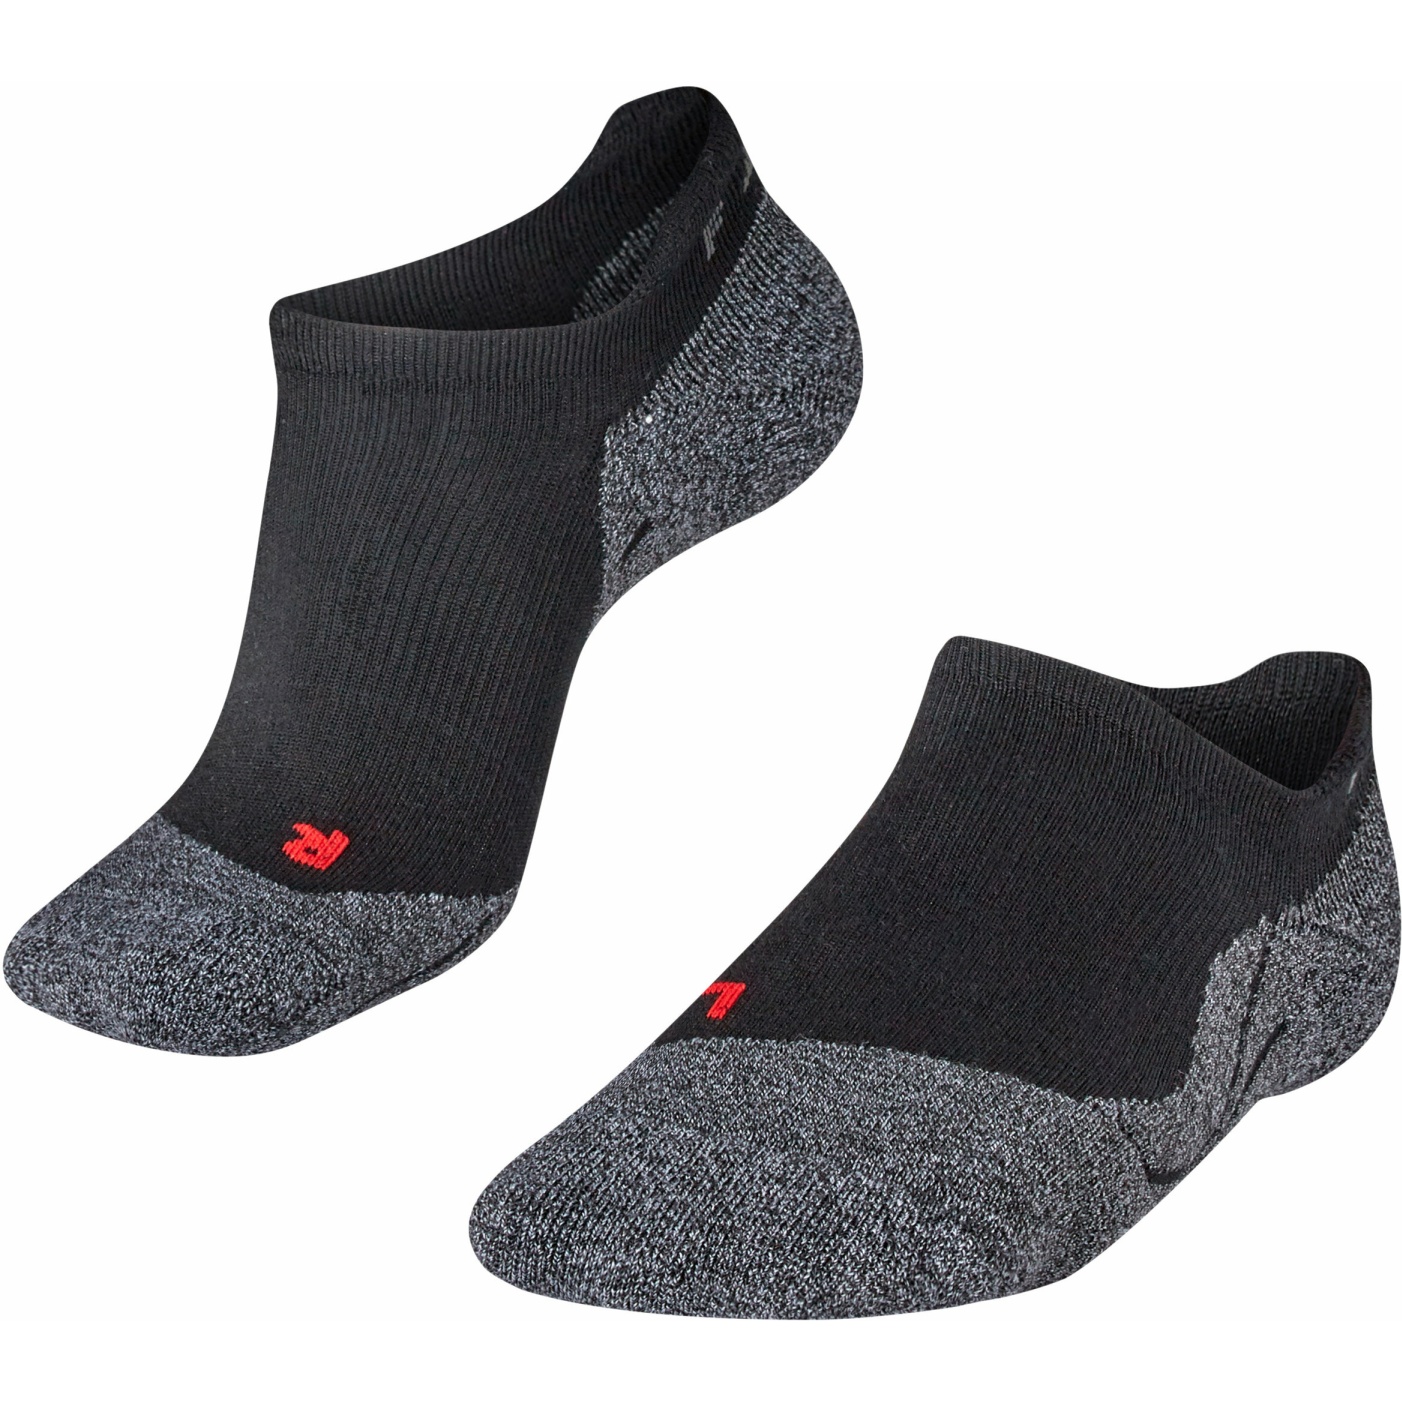 Picture of Falke RU3 Comfort Invisible Running Socks - black-mix 3010